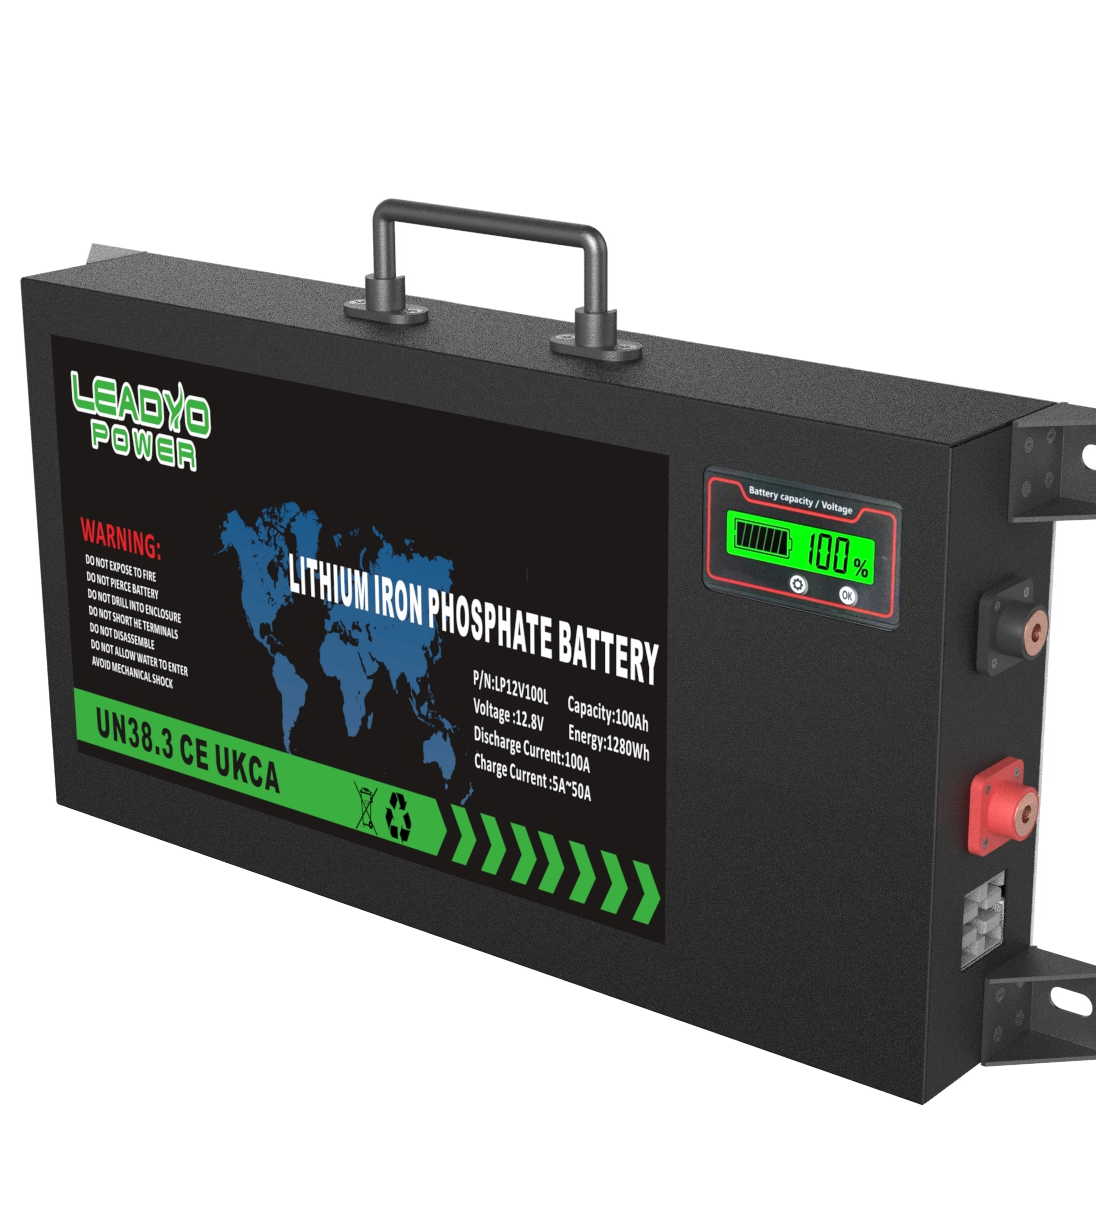 Unlock Reliable Power Solutions with Leadyo's Slimline LiFePO4 Batteries